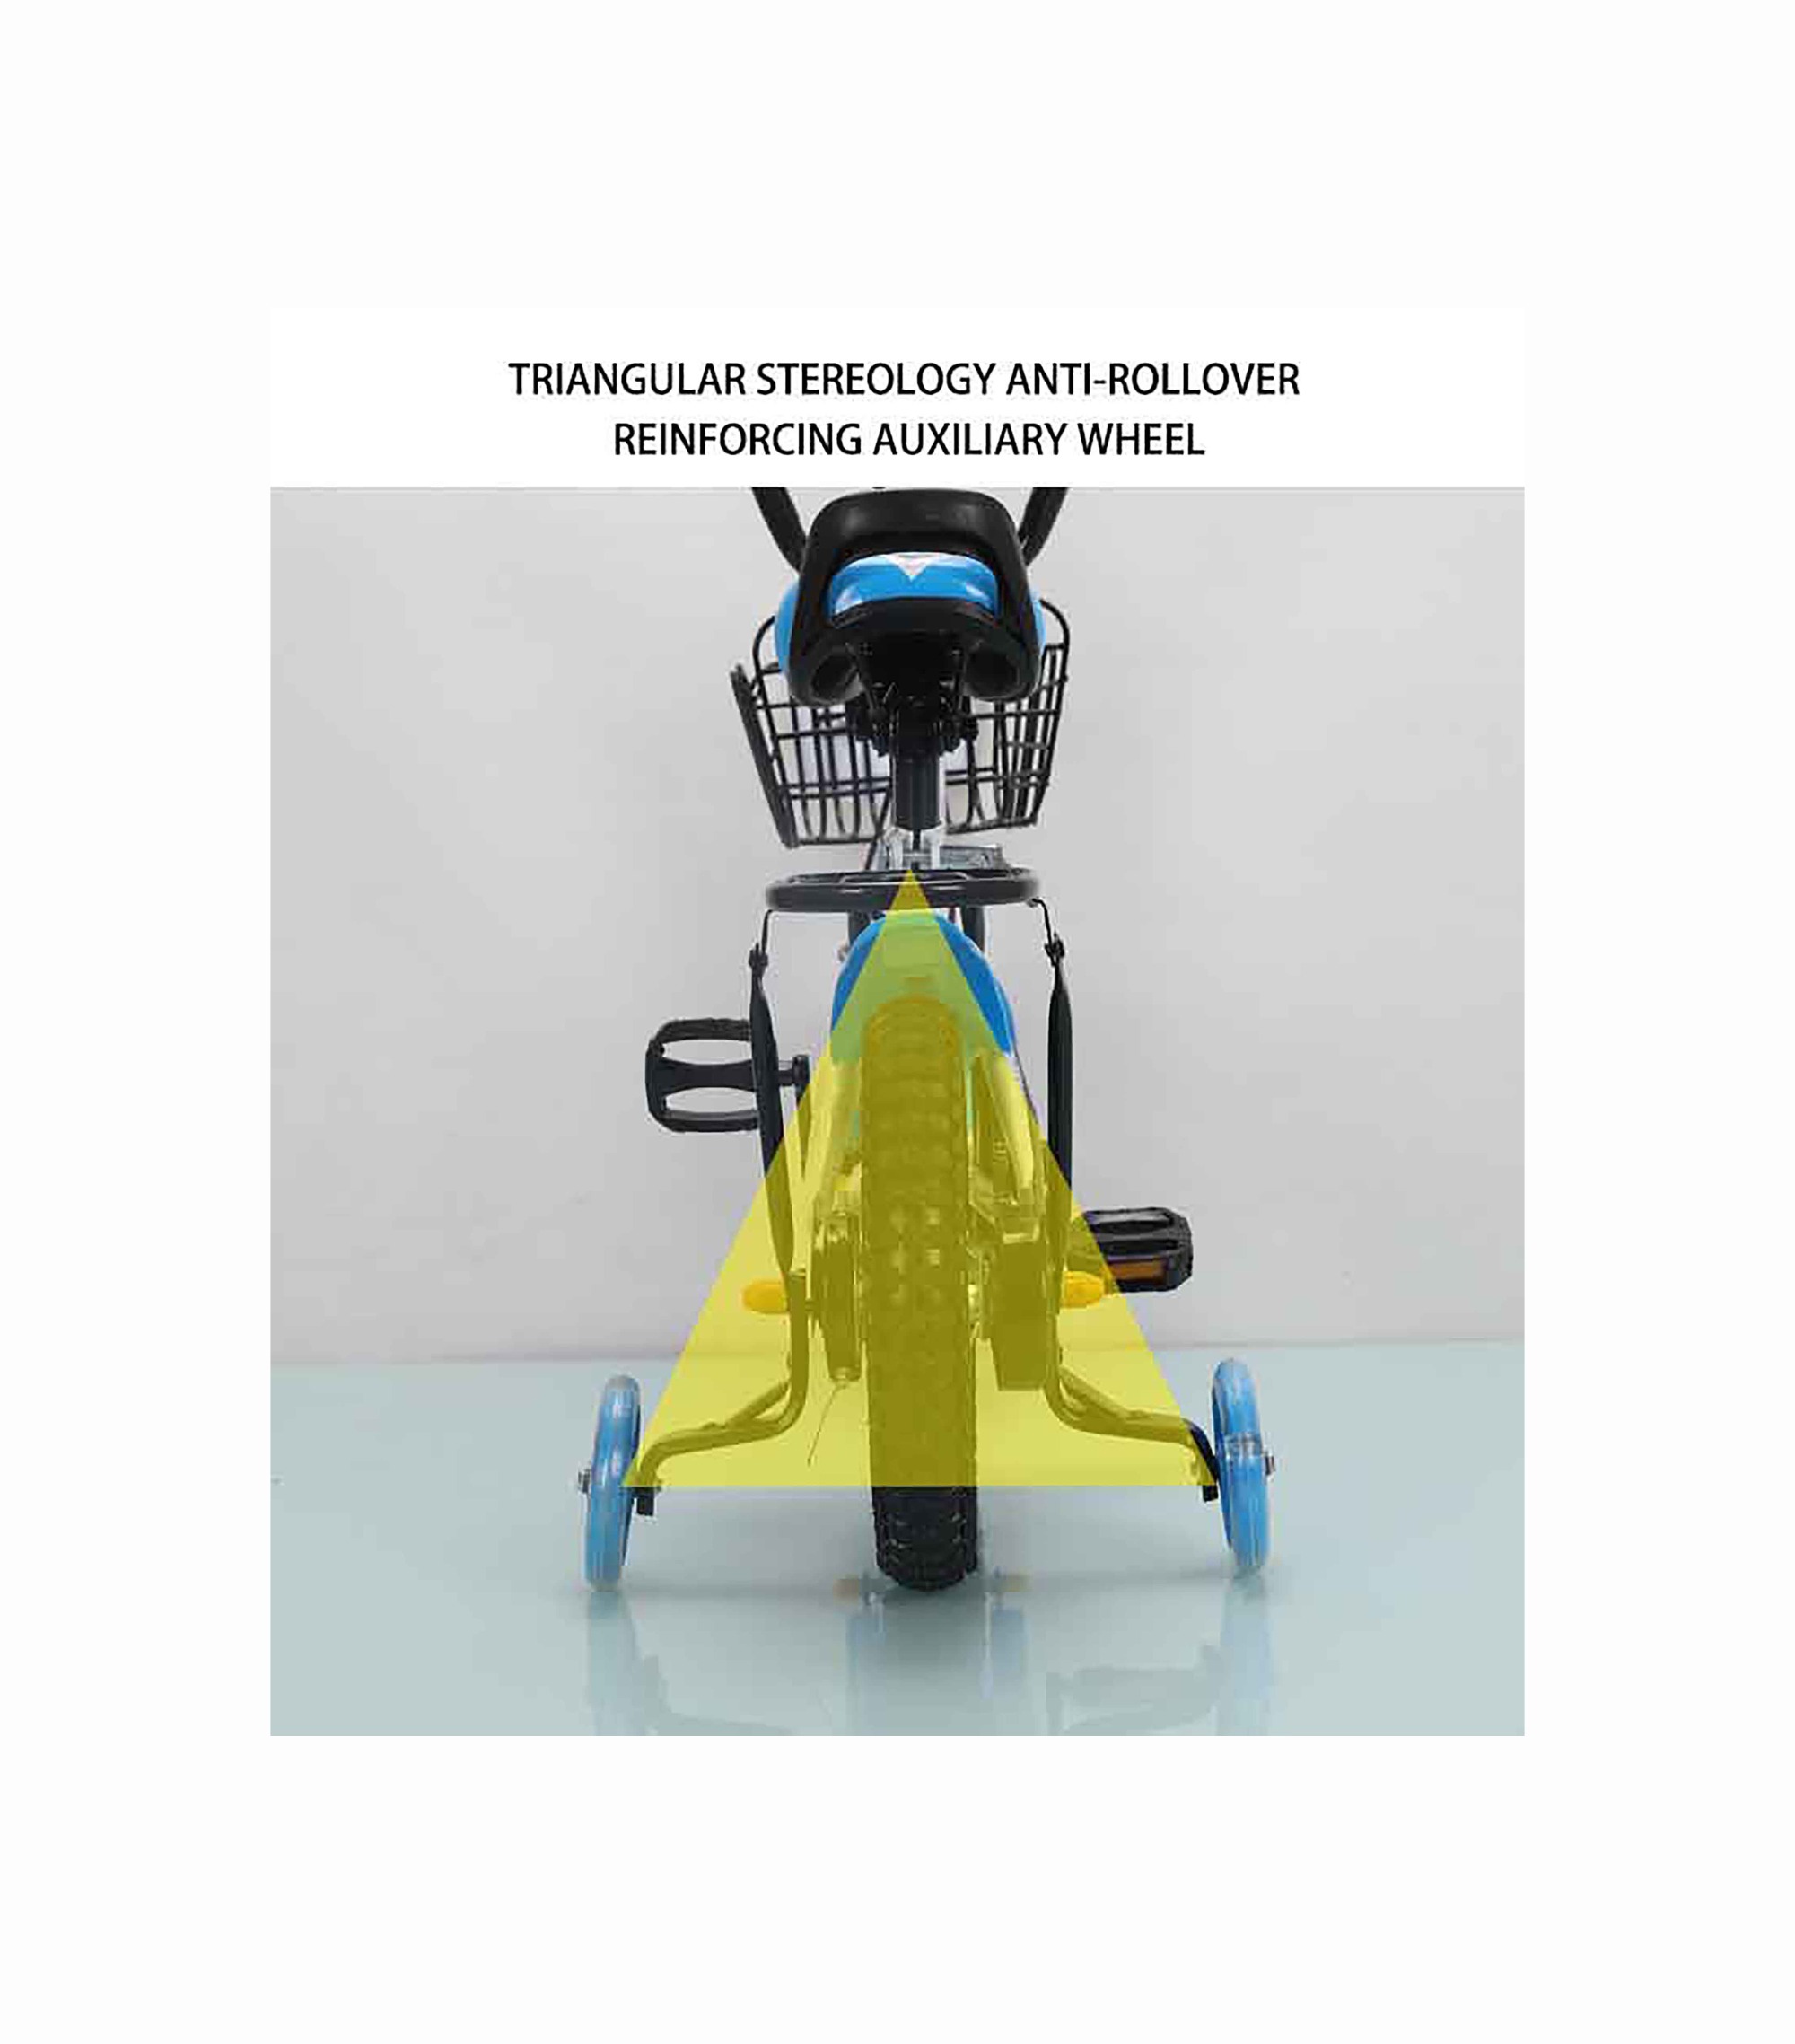 Children's Bicycle 12, 14, 16 Inch Wheel Size ids Bike Removable Stabiliser Pedal Pals Kids Bike